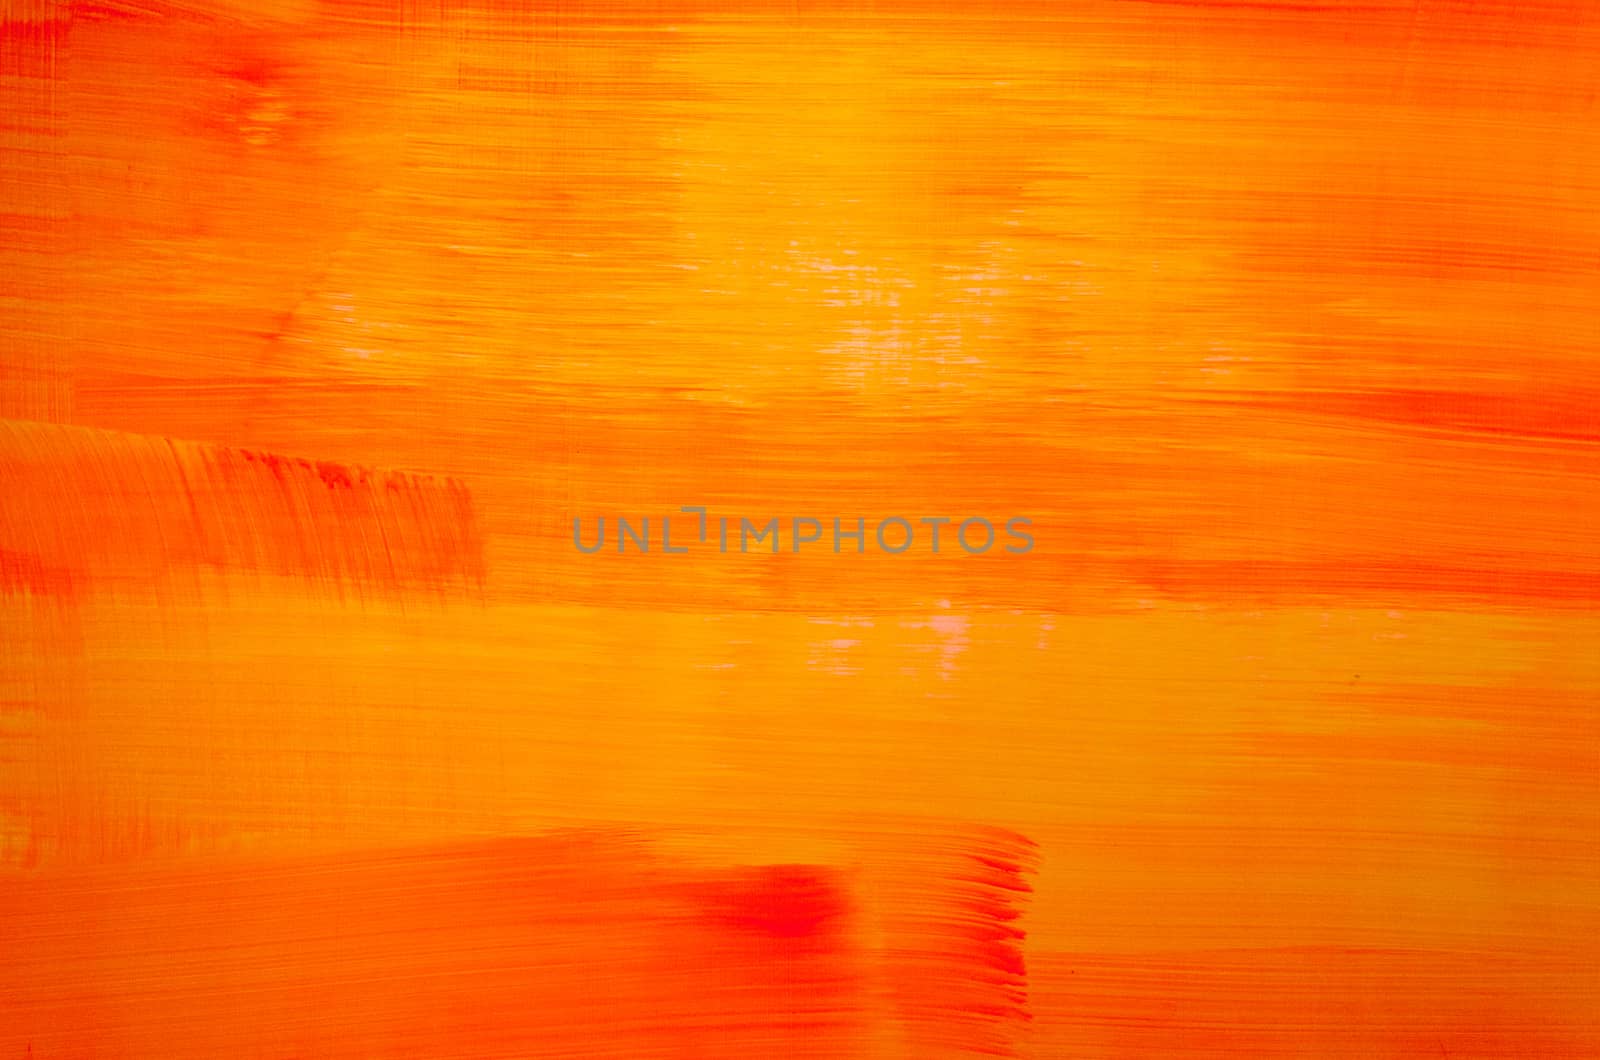 Abstract red / orange background by JFsPic